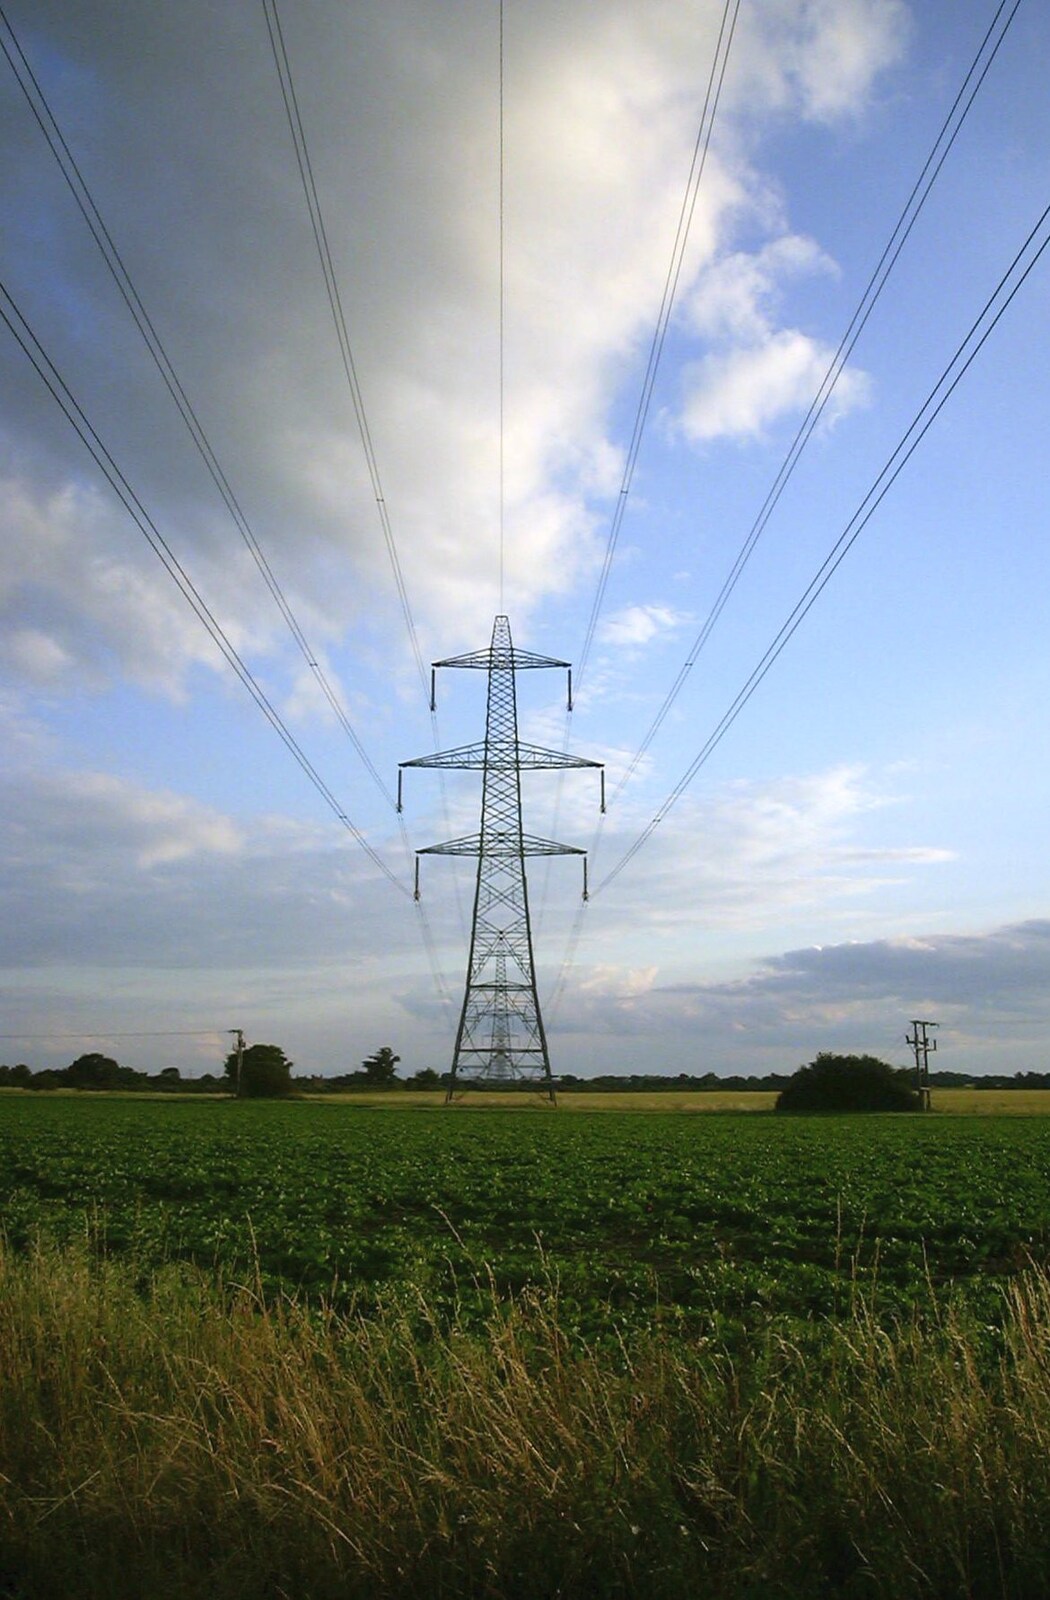 Electricity pylons stride across the land from June Randomness, Brome, Suffolk - 15th June 2001